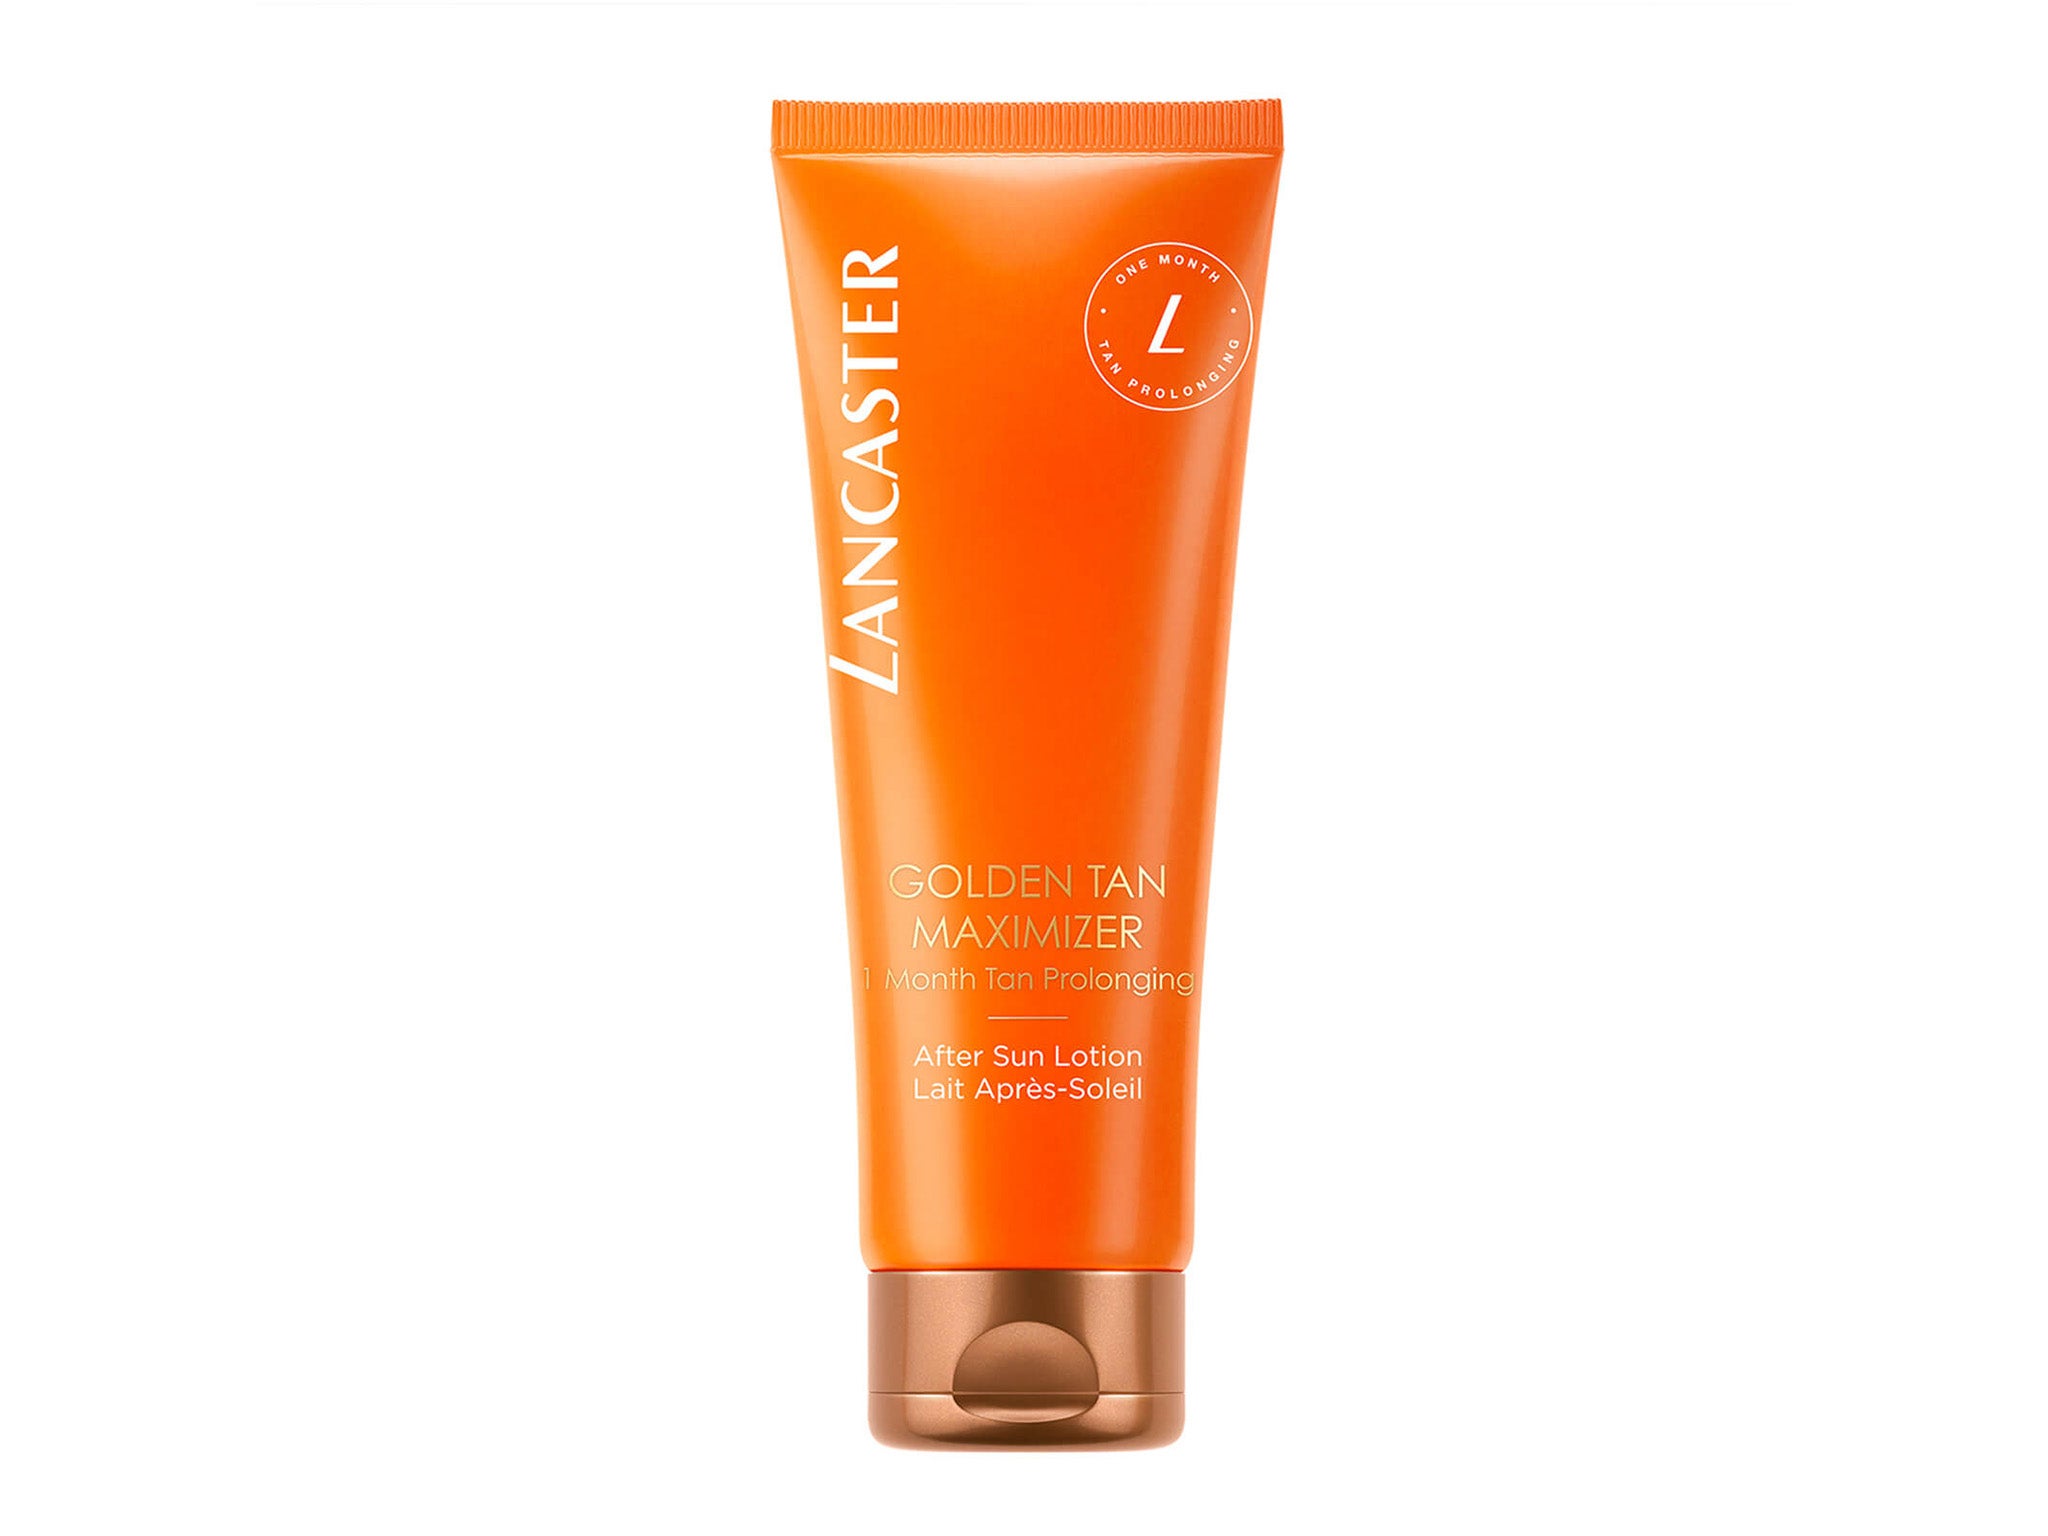 Prolong a glowy tan with this after sun lotion that will reduce skin peeling too